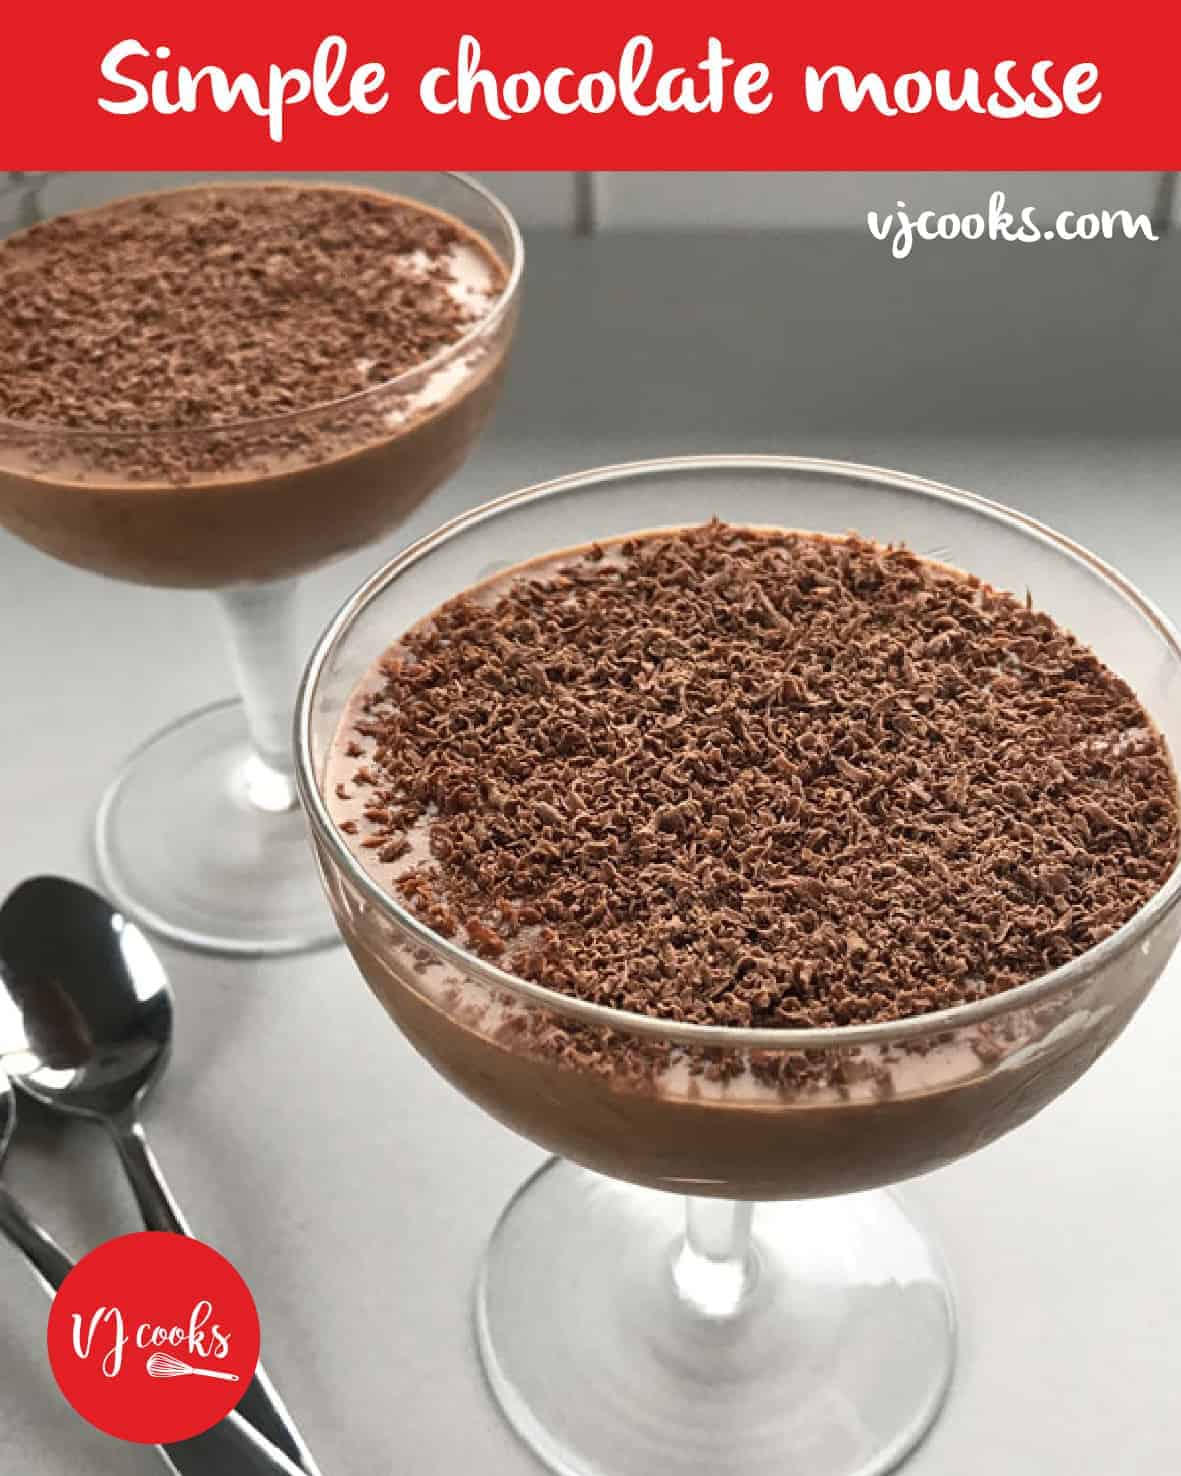 VJ cooks easy chocolate mousse - only 4 ingredients 